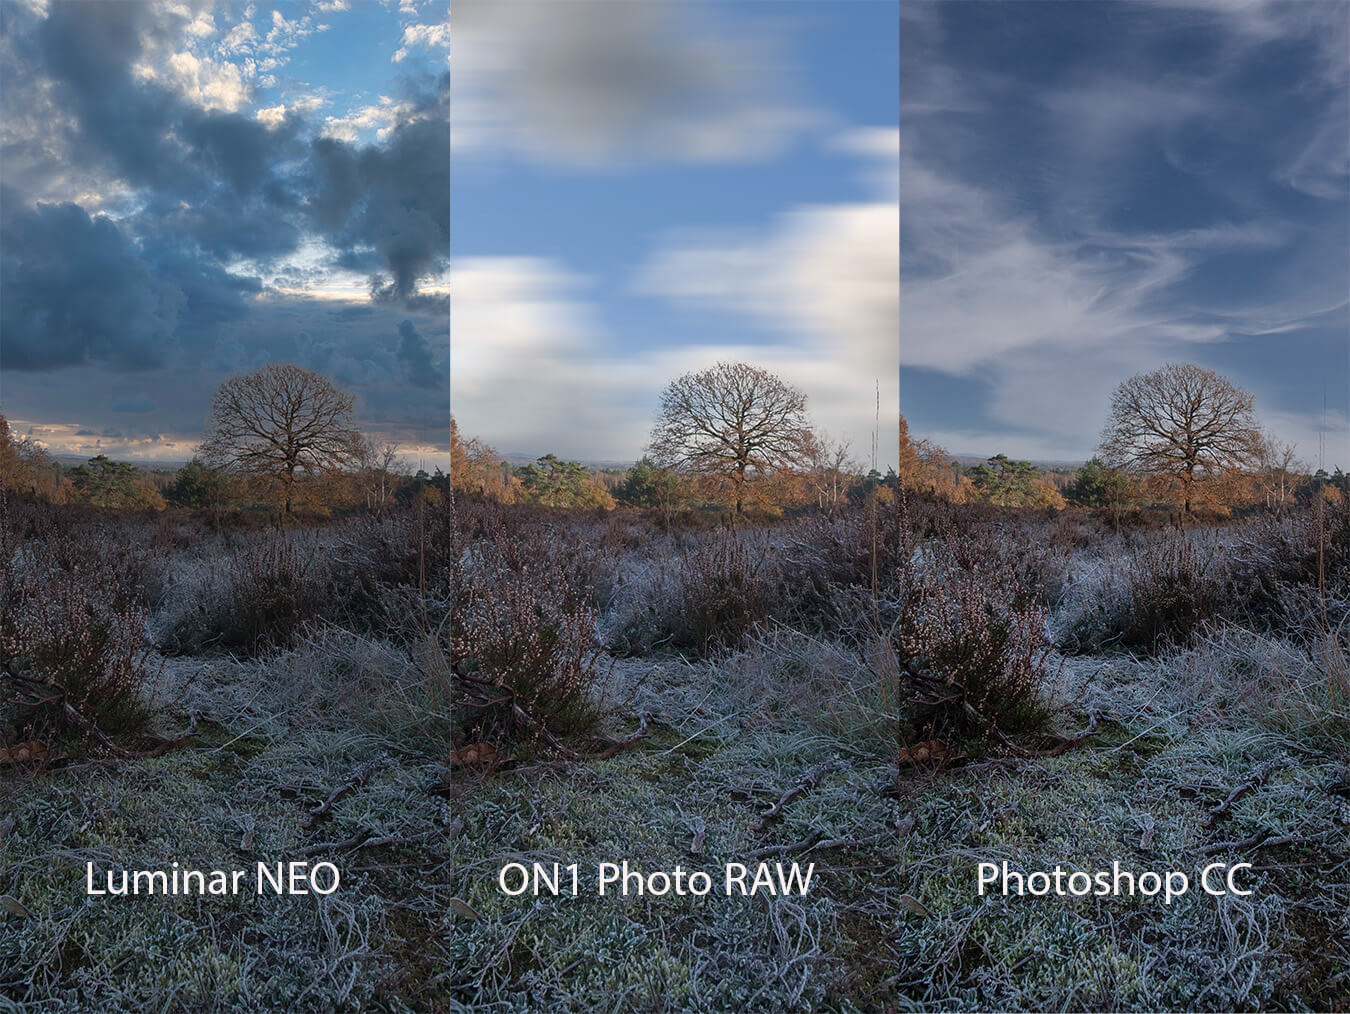 How good is the AI to swap out the sky in photos?